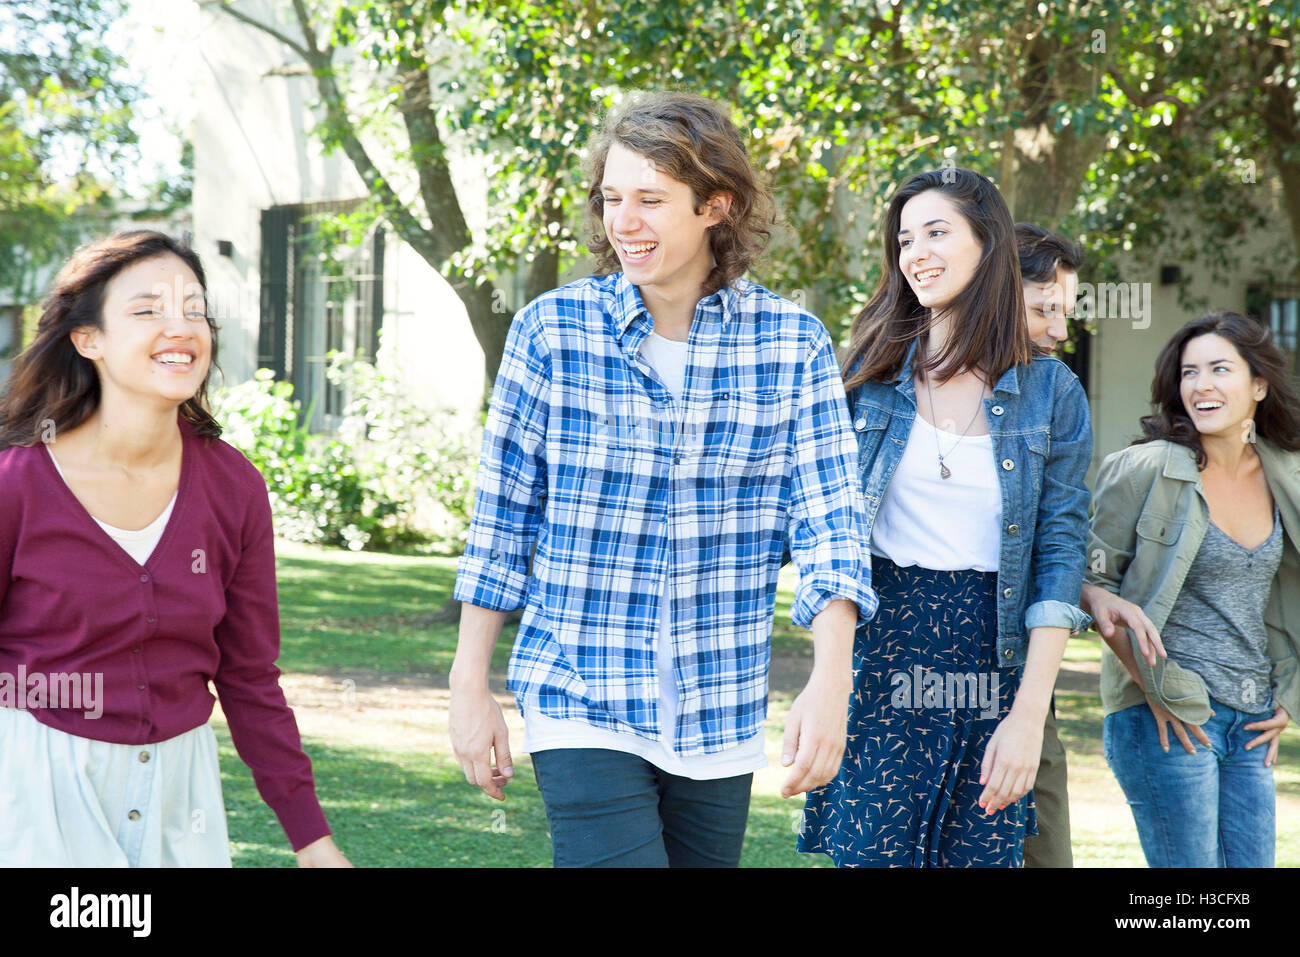 College friends walking together outdoors Stock Photo